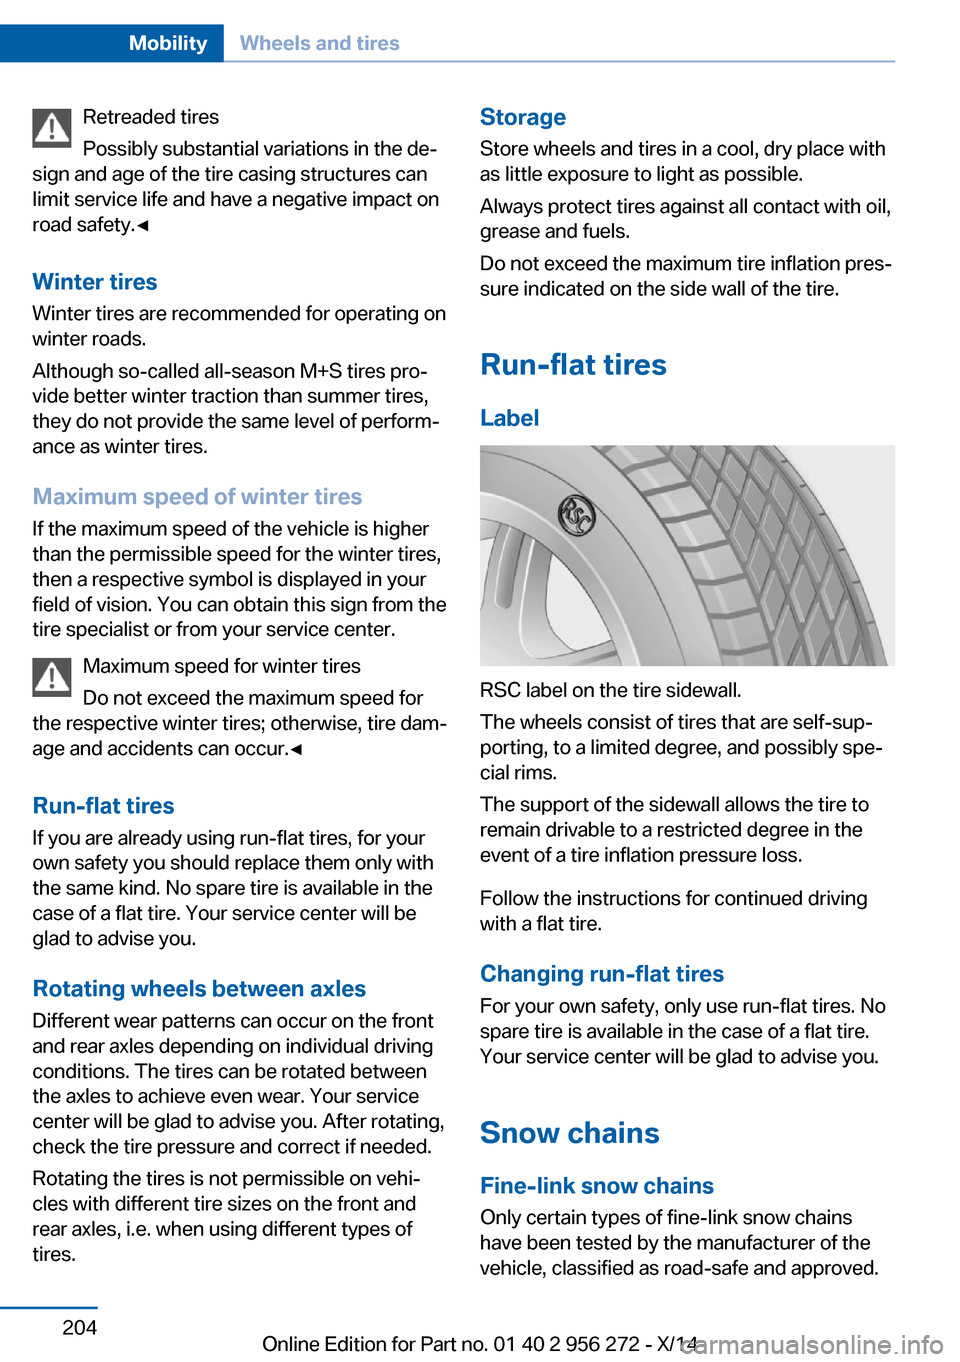 BMW ACTIVE HYBRID 5 2014 F10H Owners Manual Retreaded tires
Possibly substantial variations in the de‐
sign and age of the tire casing structures can
limit service life and have a negative impact on
road safety.◀
Winter tires
Winter tires a